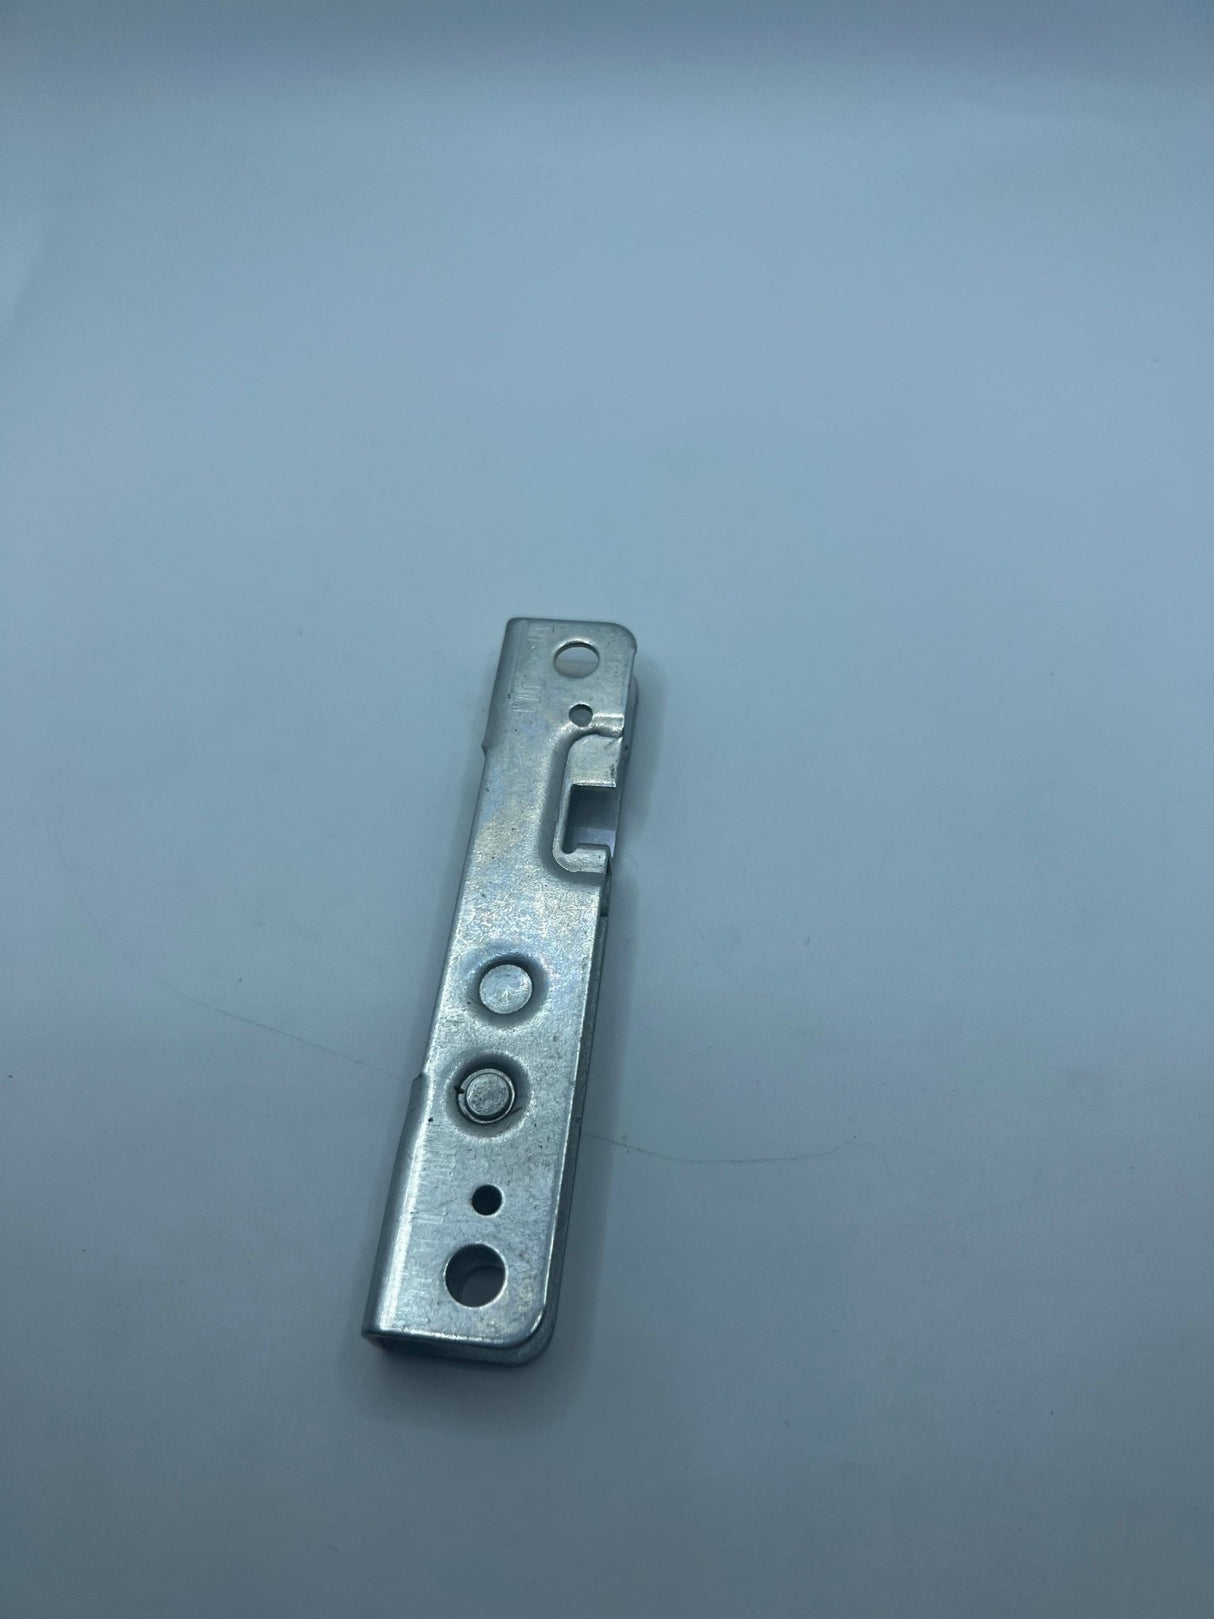 Ilve 900mm Oven Door Hinge Retainer Pair A/468/04 - My Oven Spares-Ilve-A/468/04 x2-6